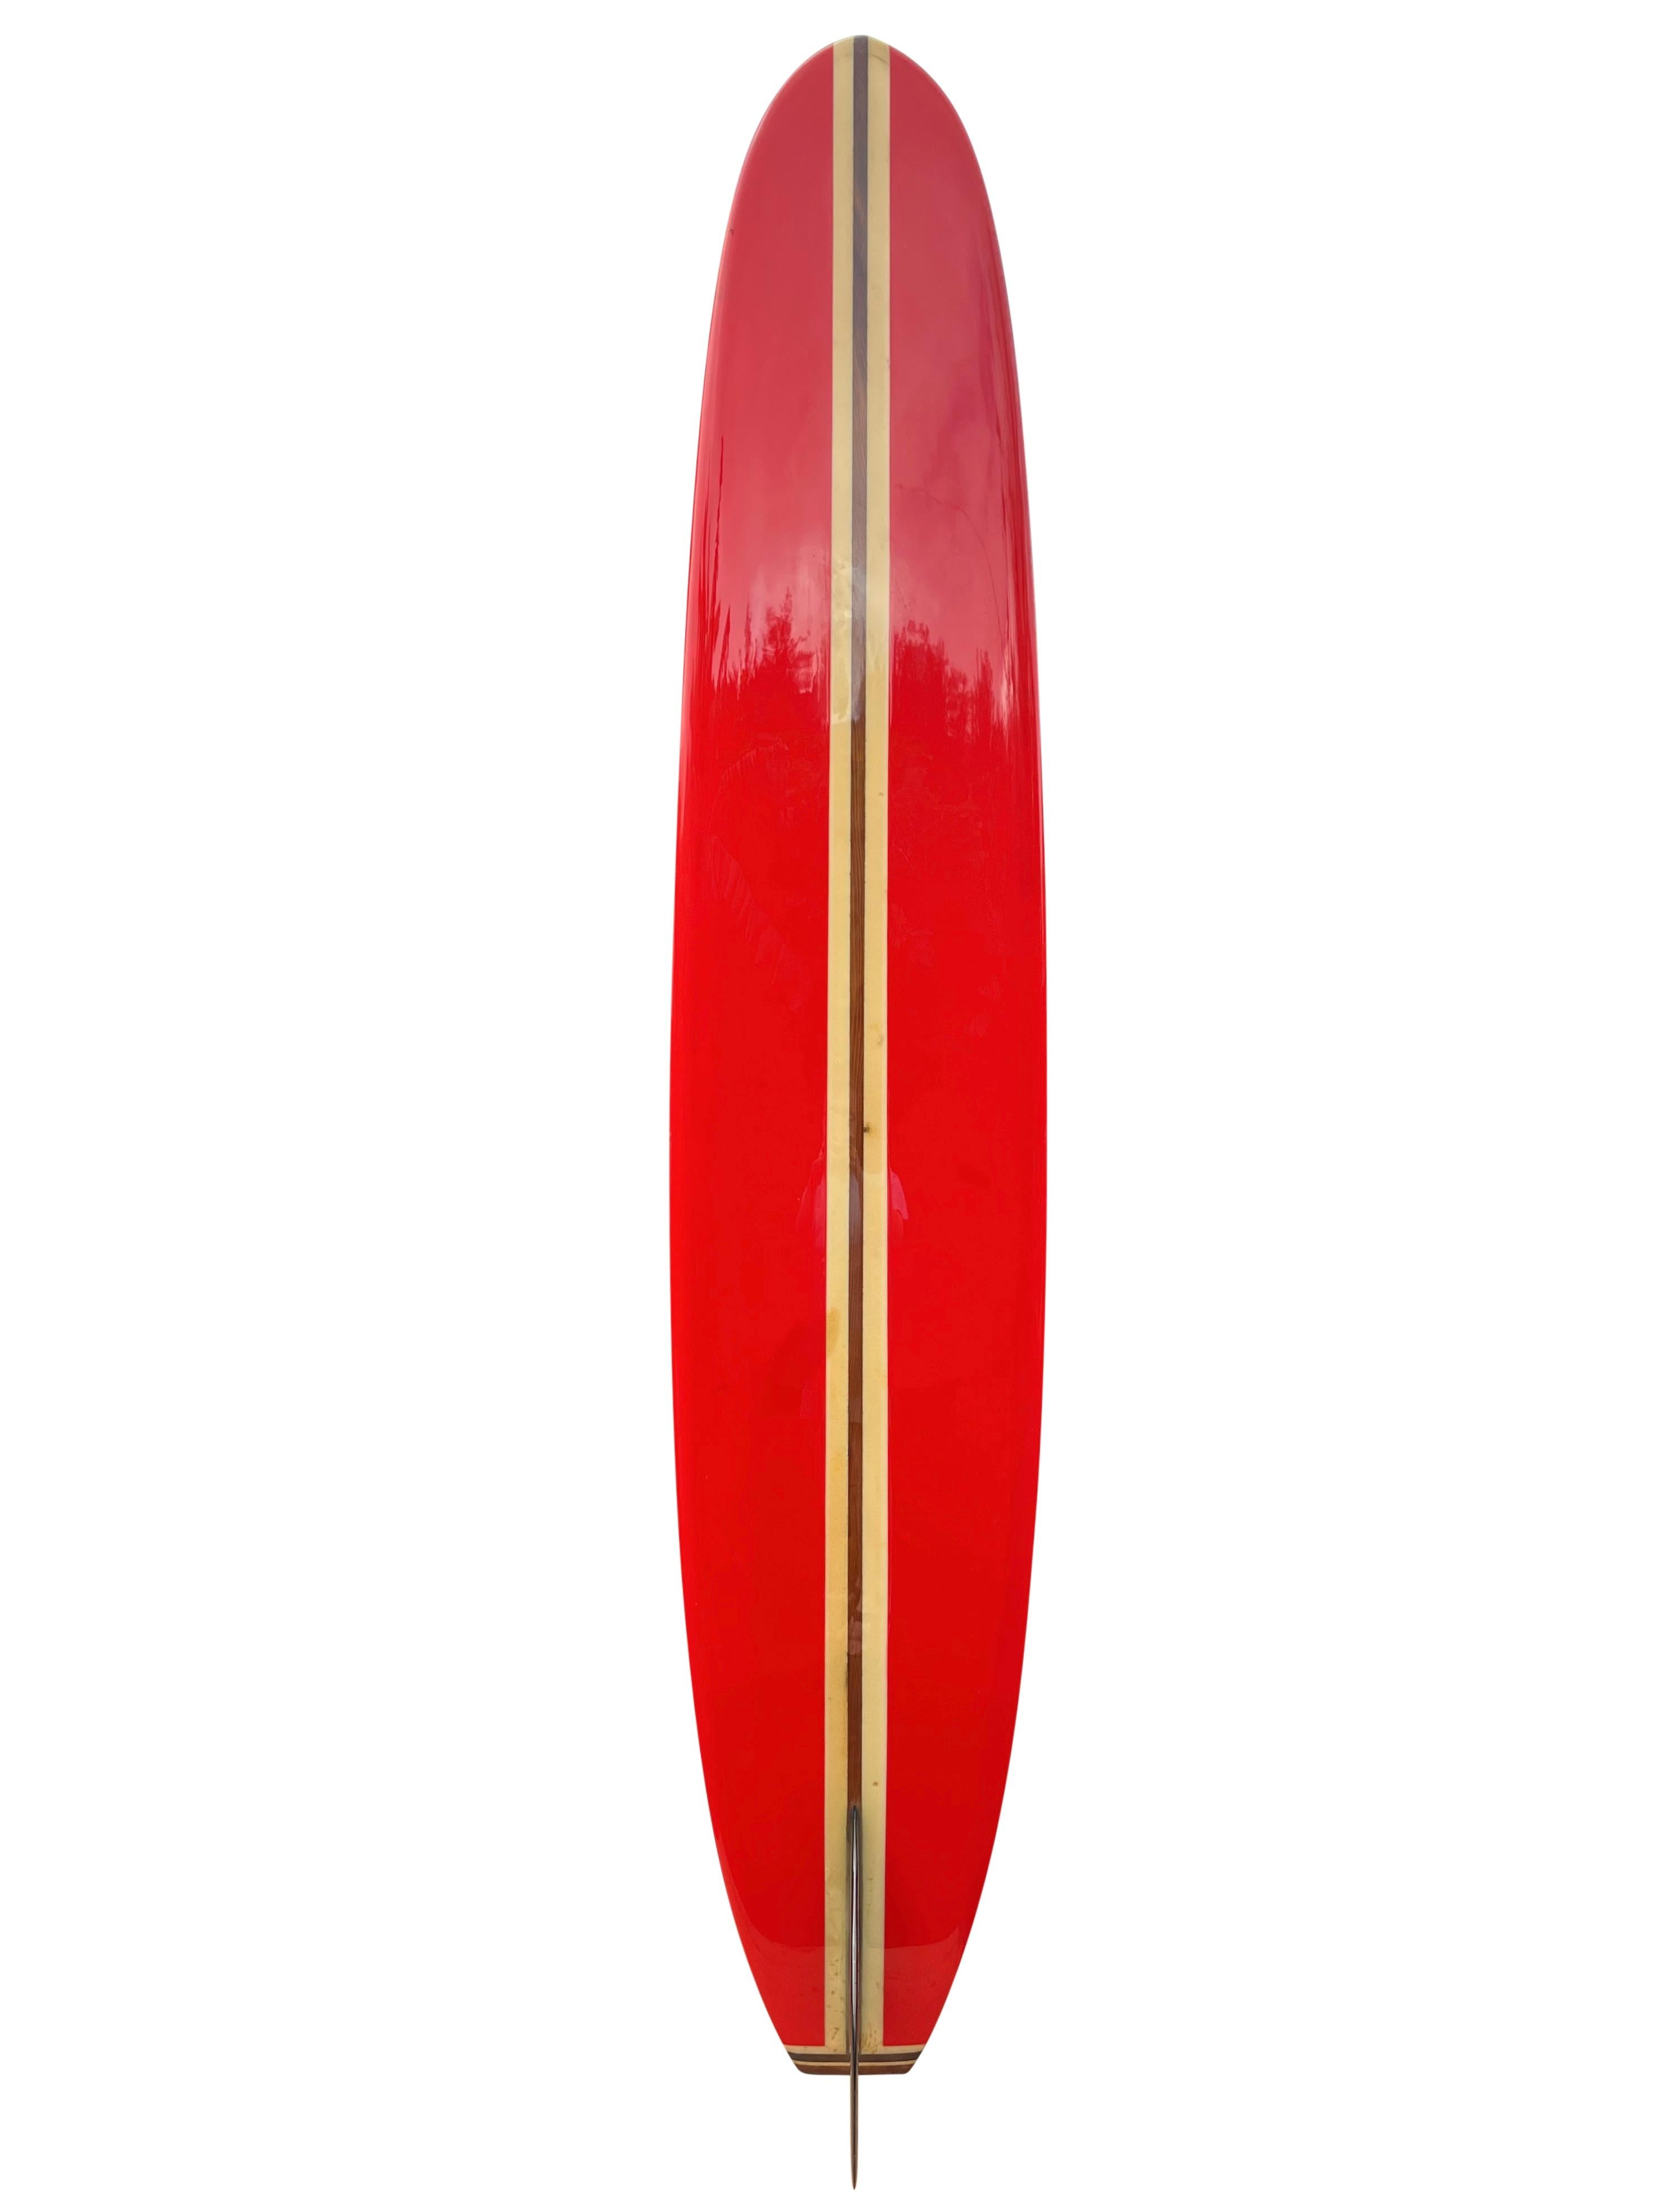 Mid-1960s Greg Noll custom longboard. Features gorgeous bright red panels, redwood stringer, and three piece wooden tail block. Beautiful jet-black single fin with signature wide square tail. A stunning example of a mid-1960s longboard made under